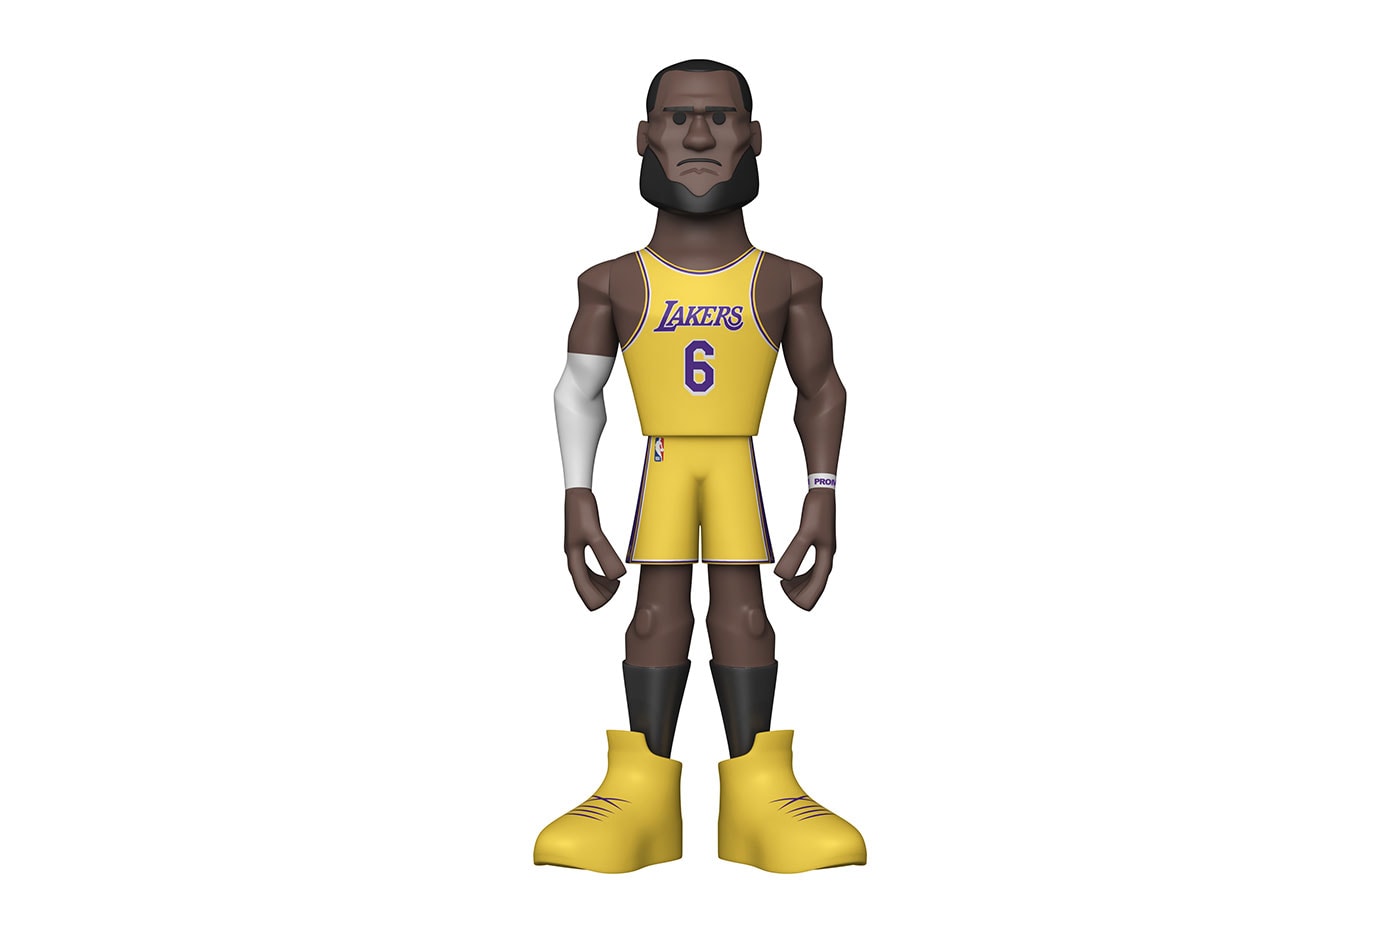 NBA Fans Can Now Add to Their Sports Memorabilia Collections With Funko's Latest Miniature Figures Lakers Lebron James Lakers Anthony Davis Bucks Giannis Antetokounmpo Rockets James Harden Clippers Kawhi Leonard Warriors Steph Curry Mavericks Luka Doncic